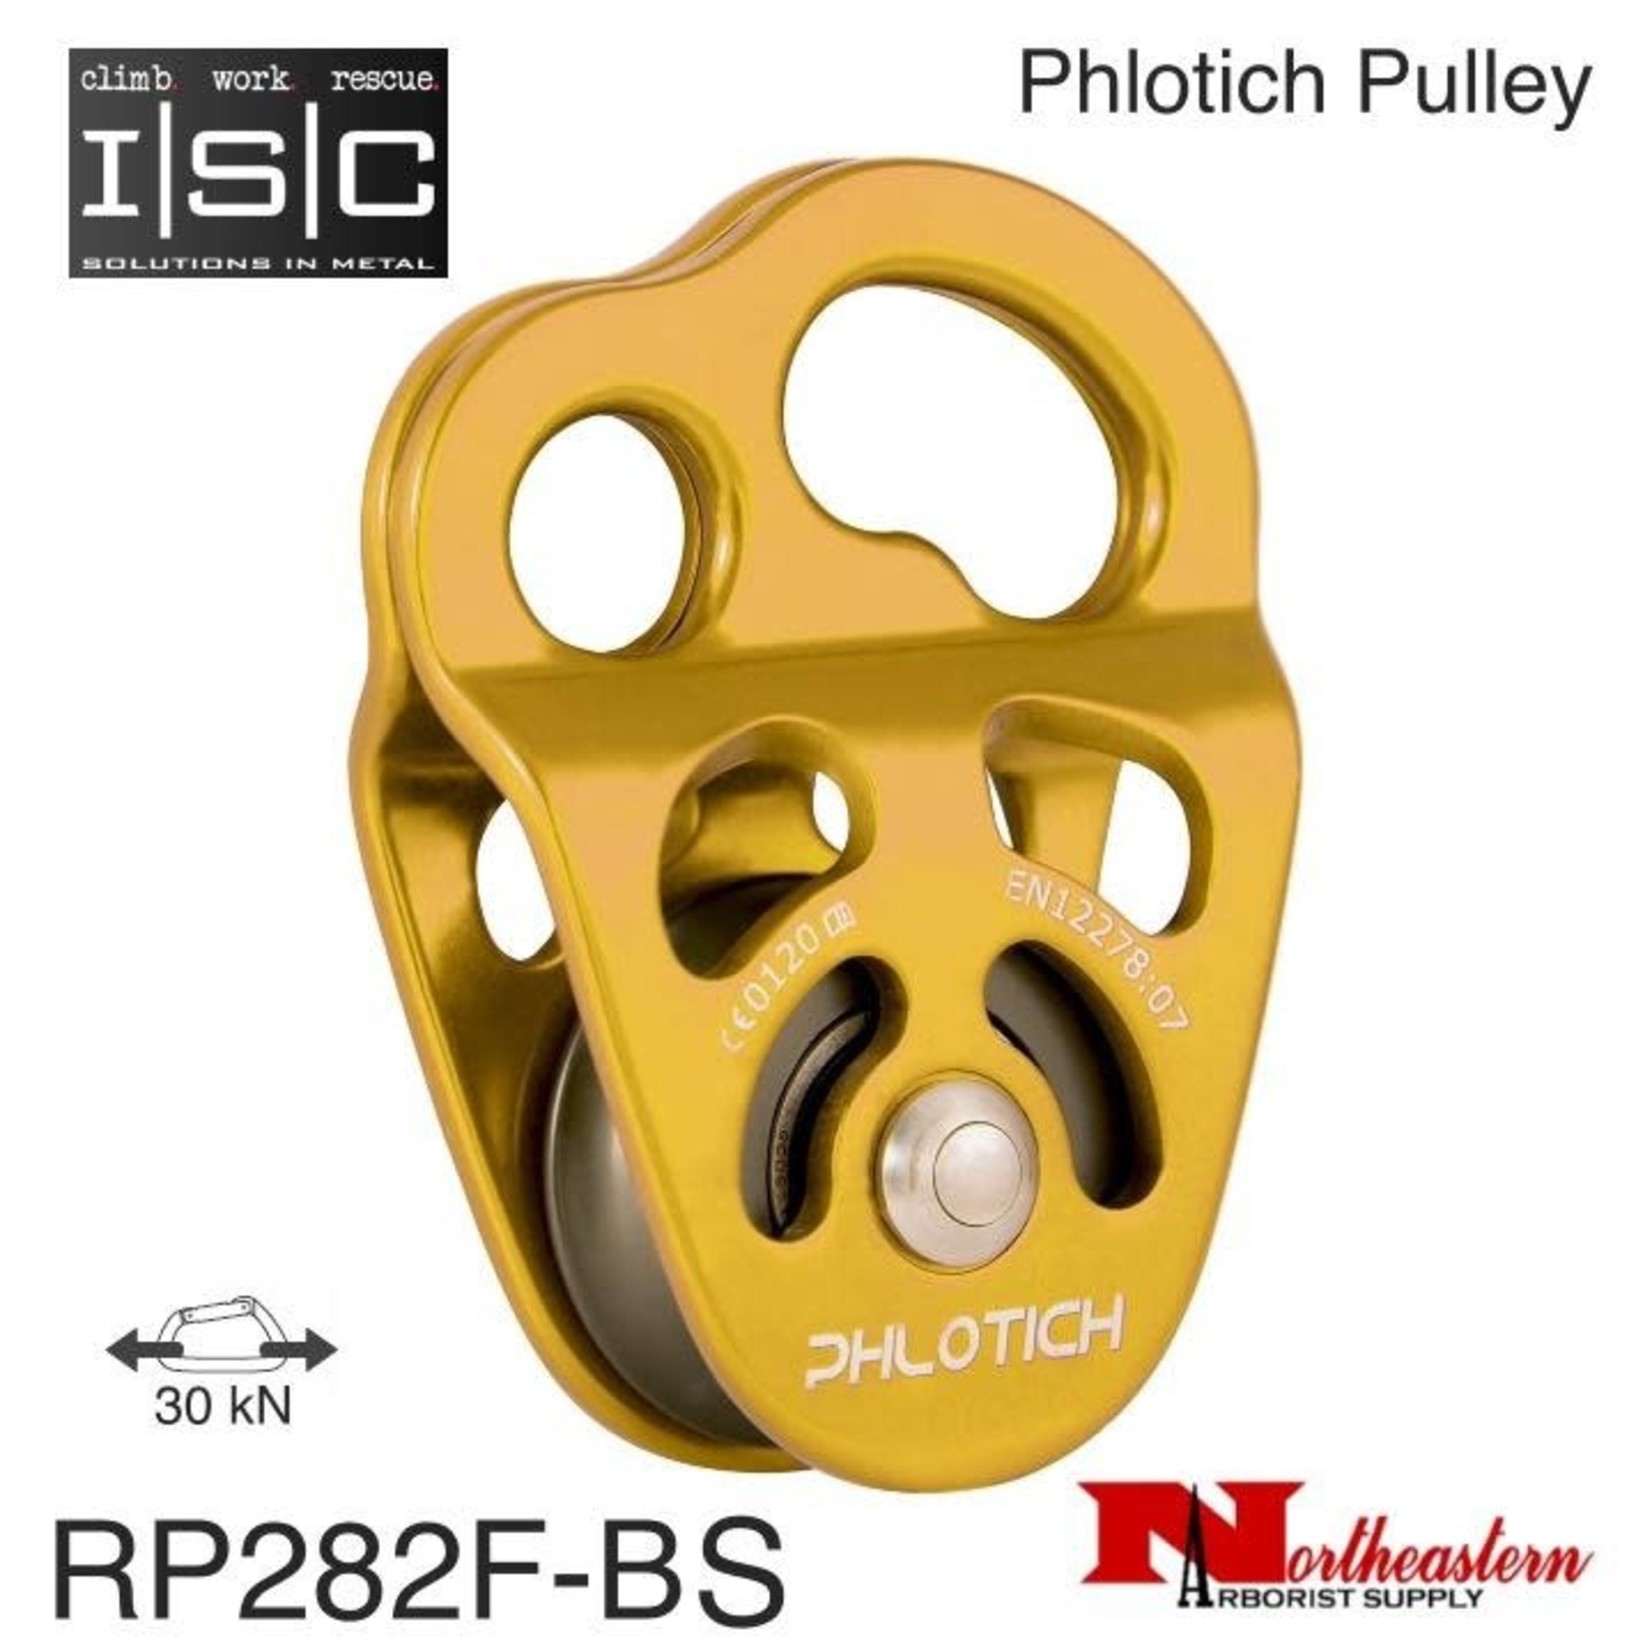 ISC Pulley Phlotich Gold with Bushing 30kN 1/2" Rope Max.